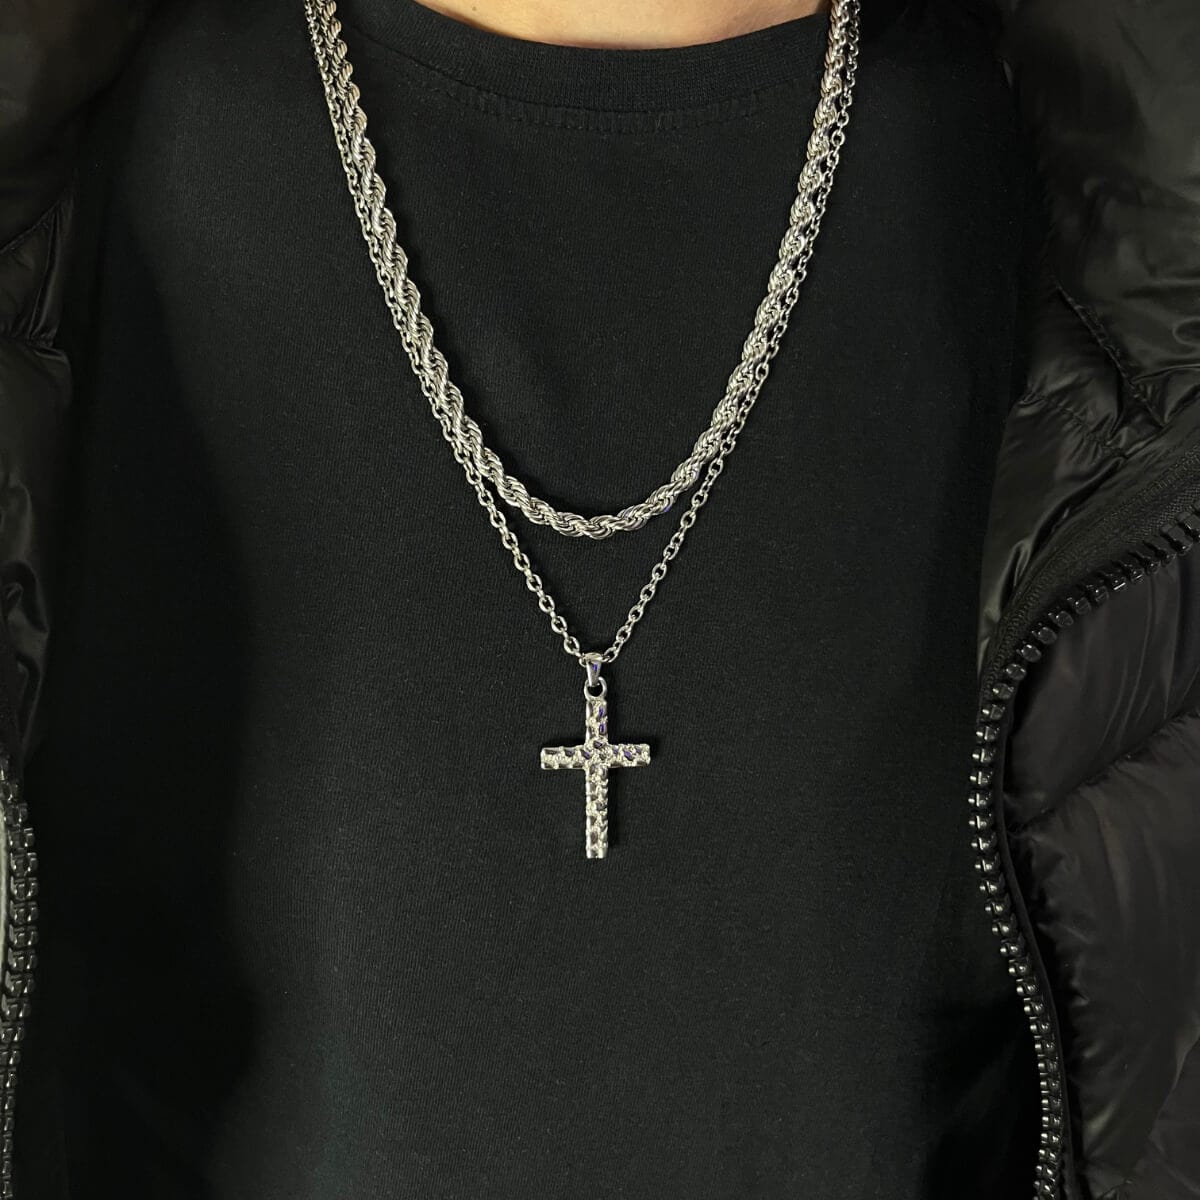 Bricked Cross + 5MM Rope Chain (Silver)